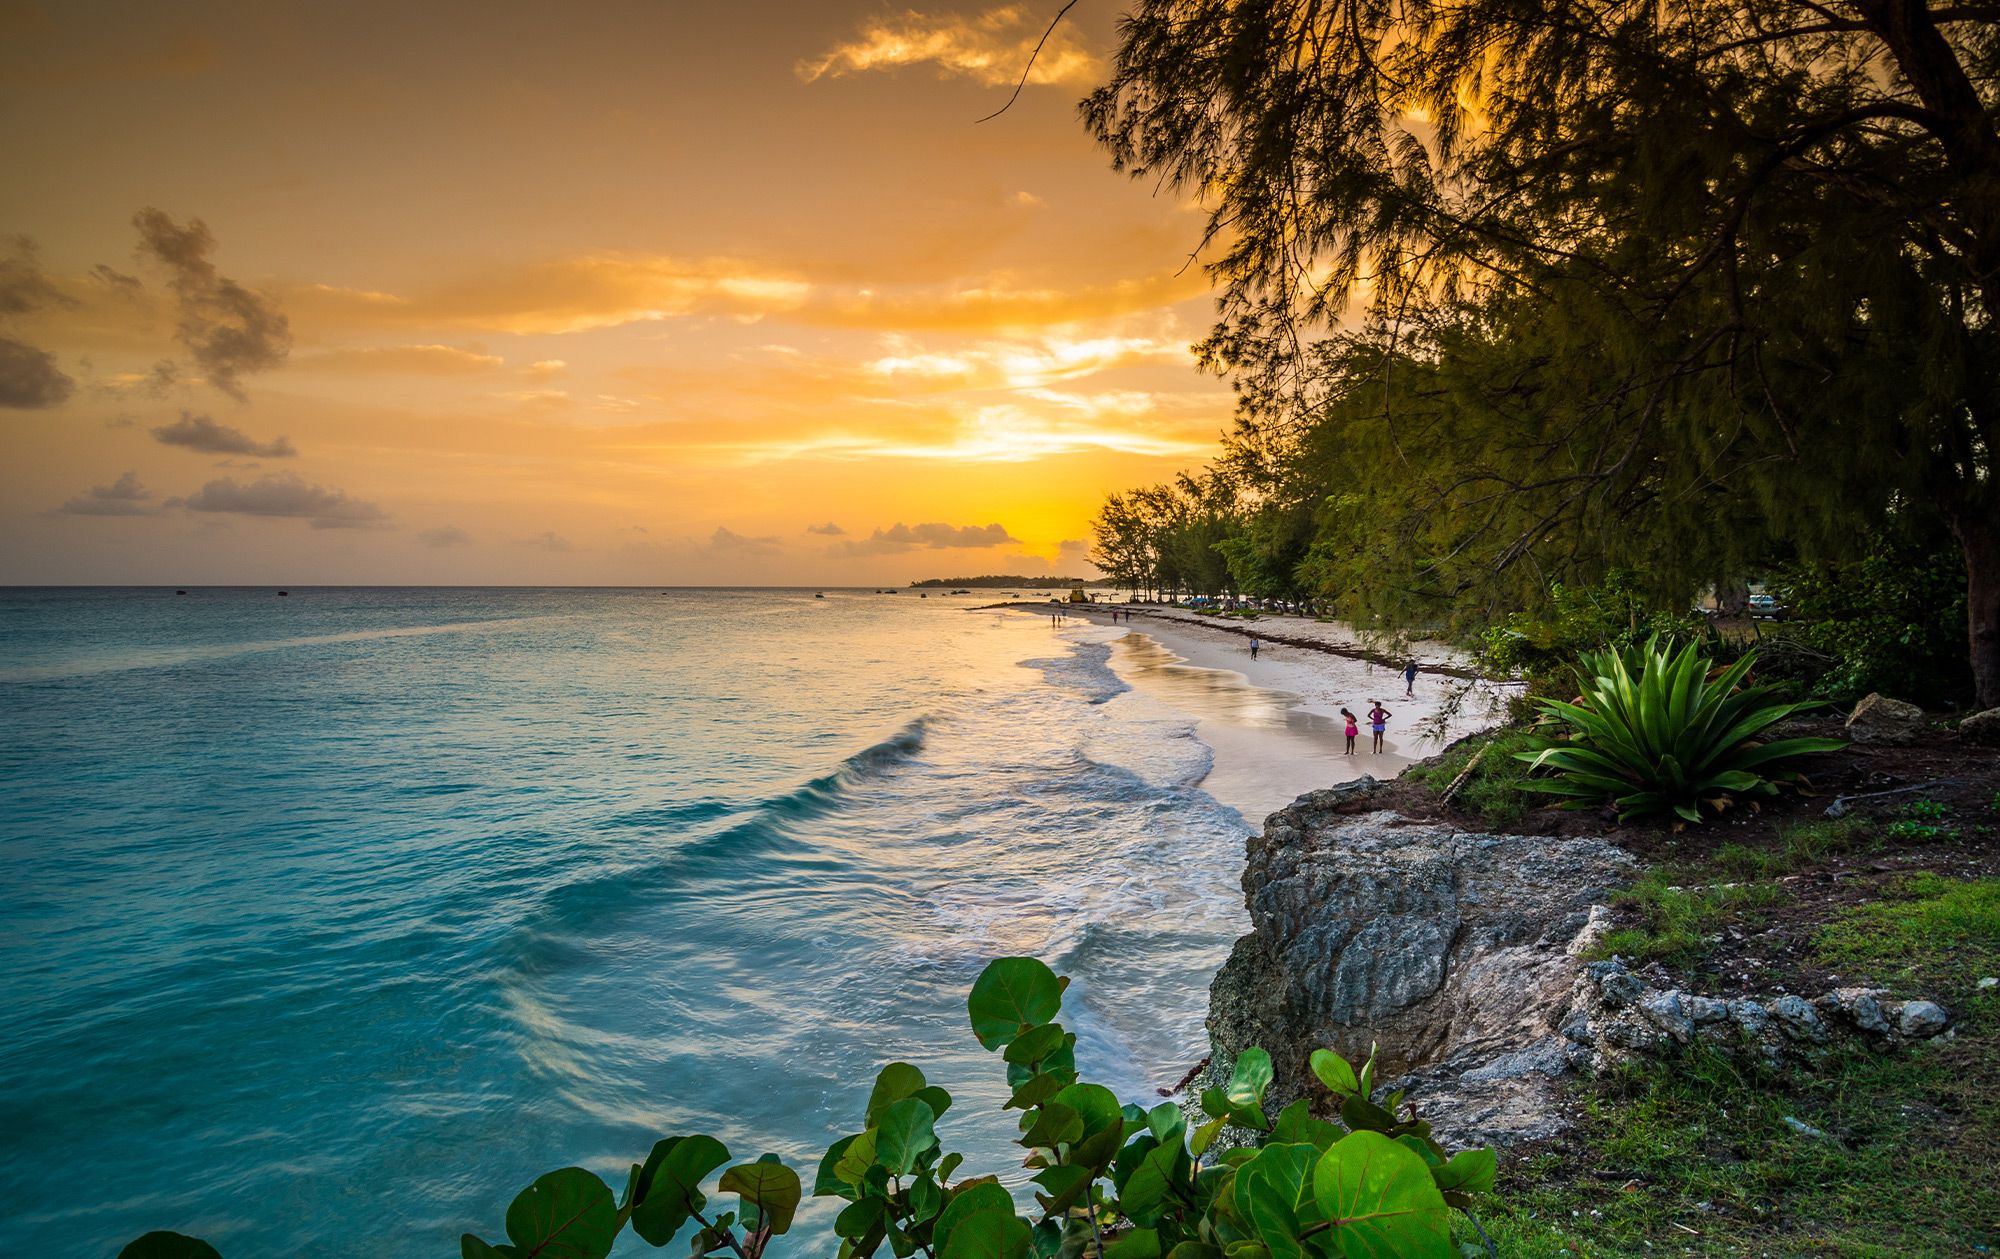 From breathtaking beaches and natural wonders, to food, drink and gorgeous hotels, Barbados makes the perfect couples break